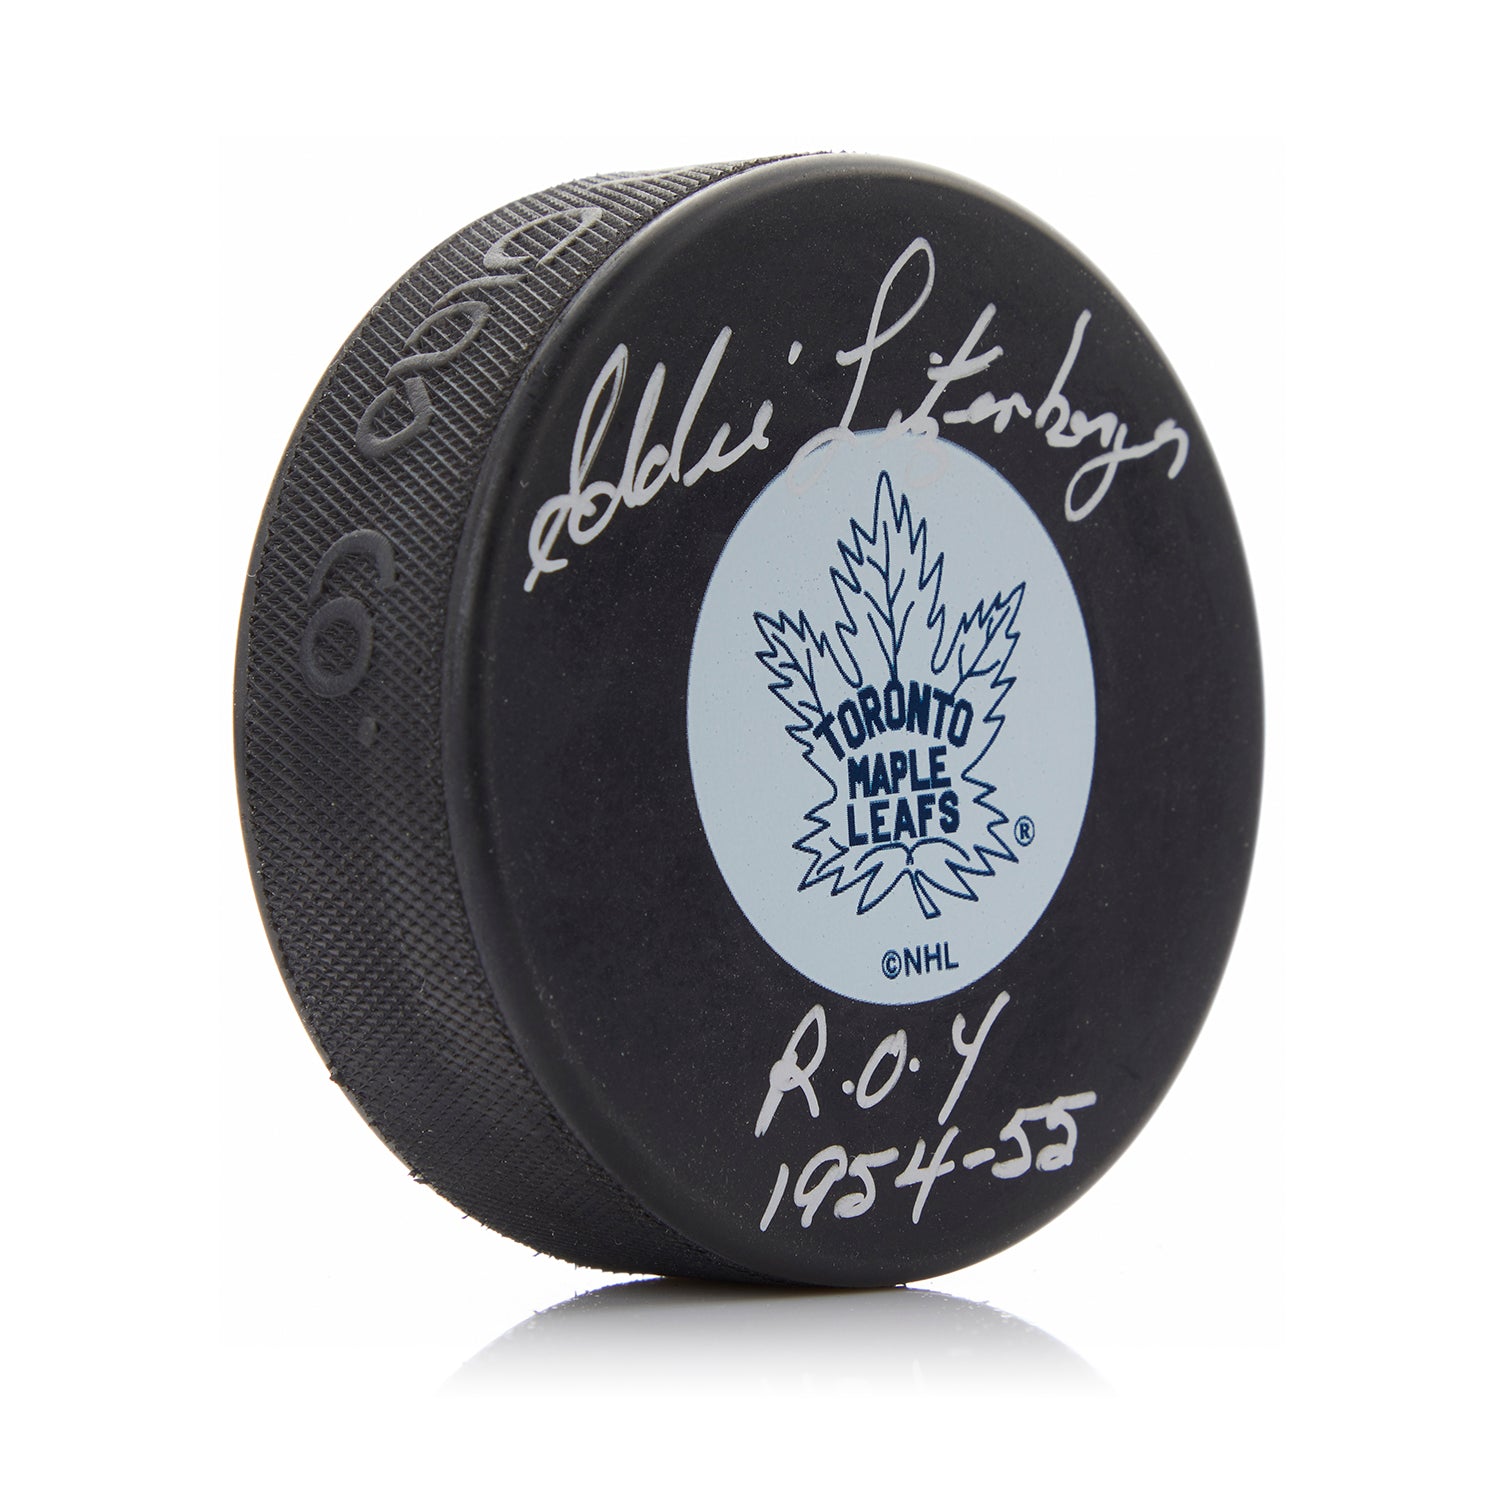 Eddie Litzenberger Signed Toronto Maple Leafs Puck with ROY Note